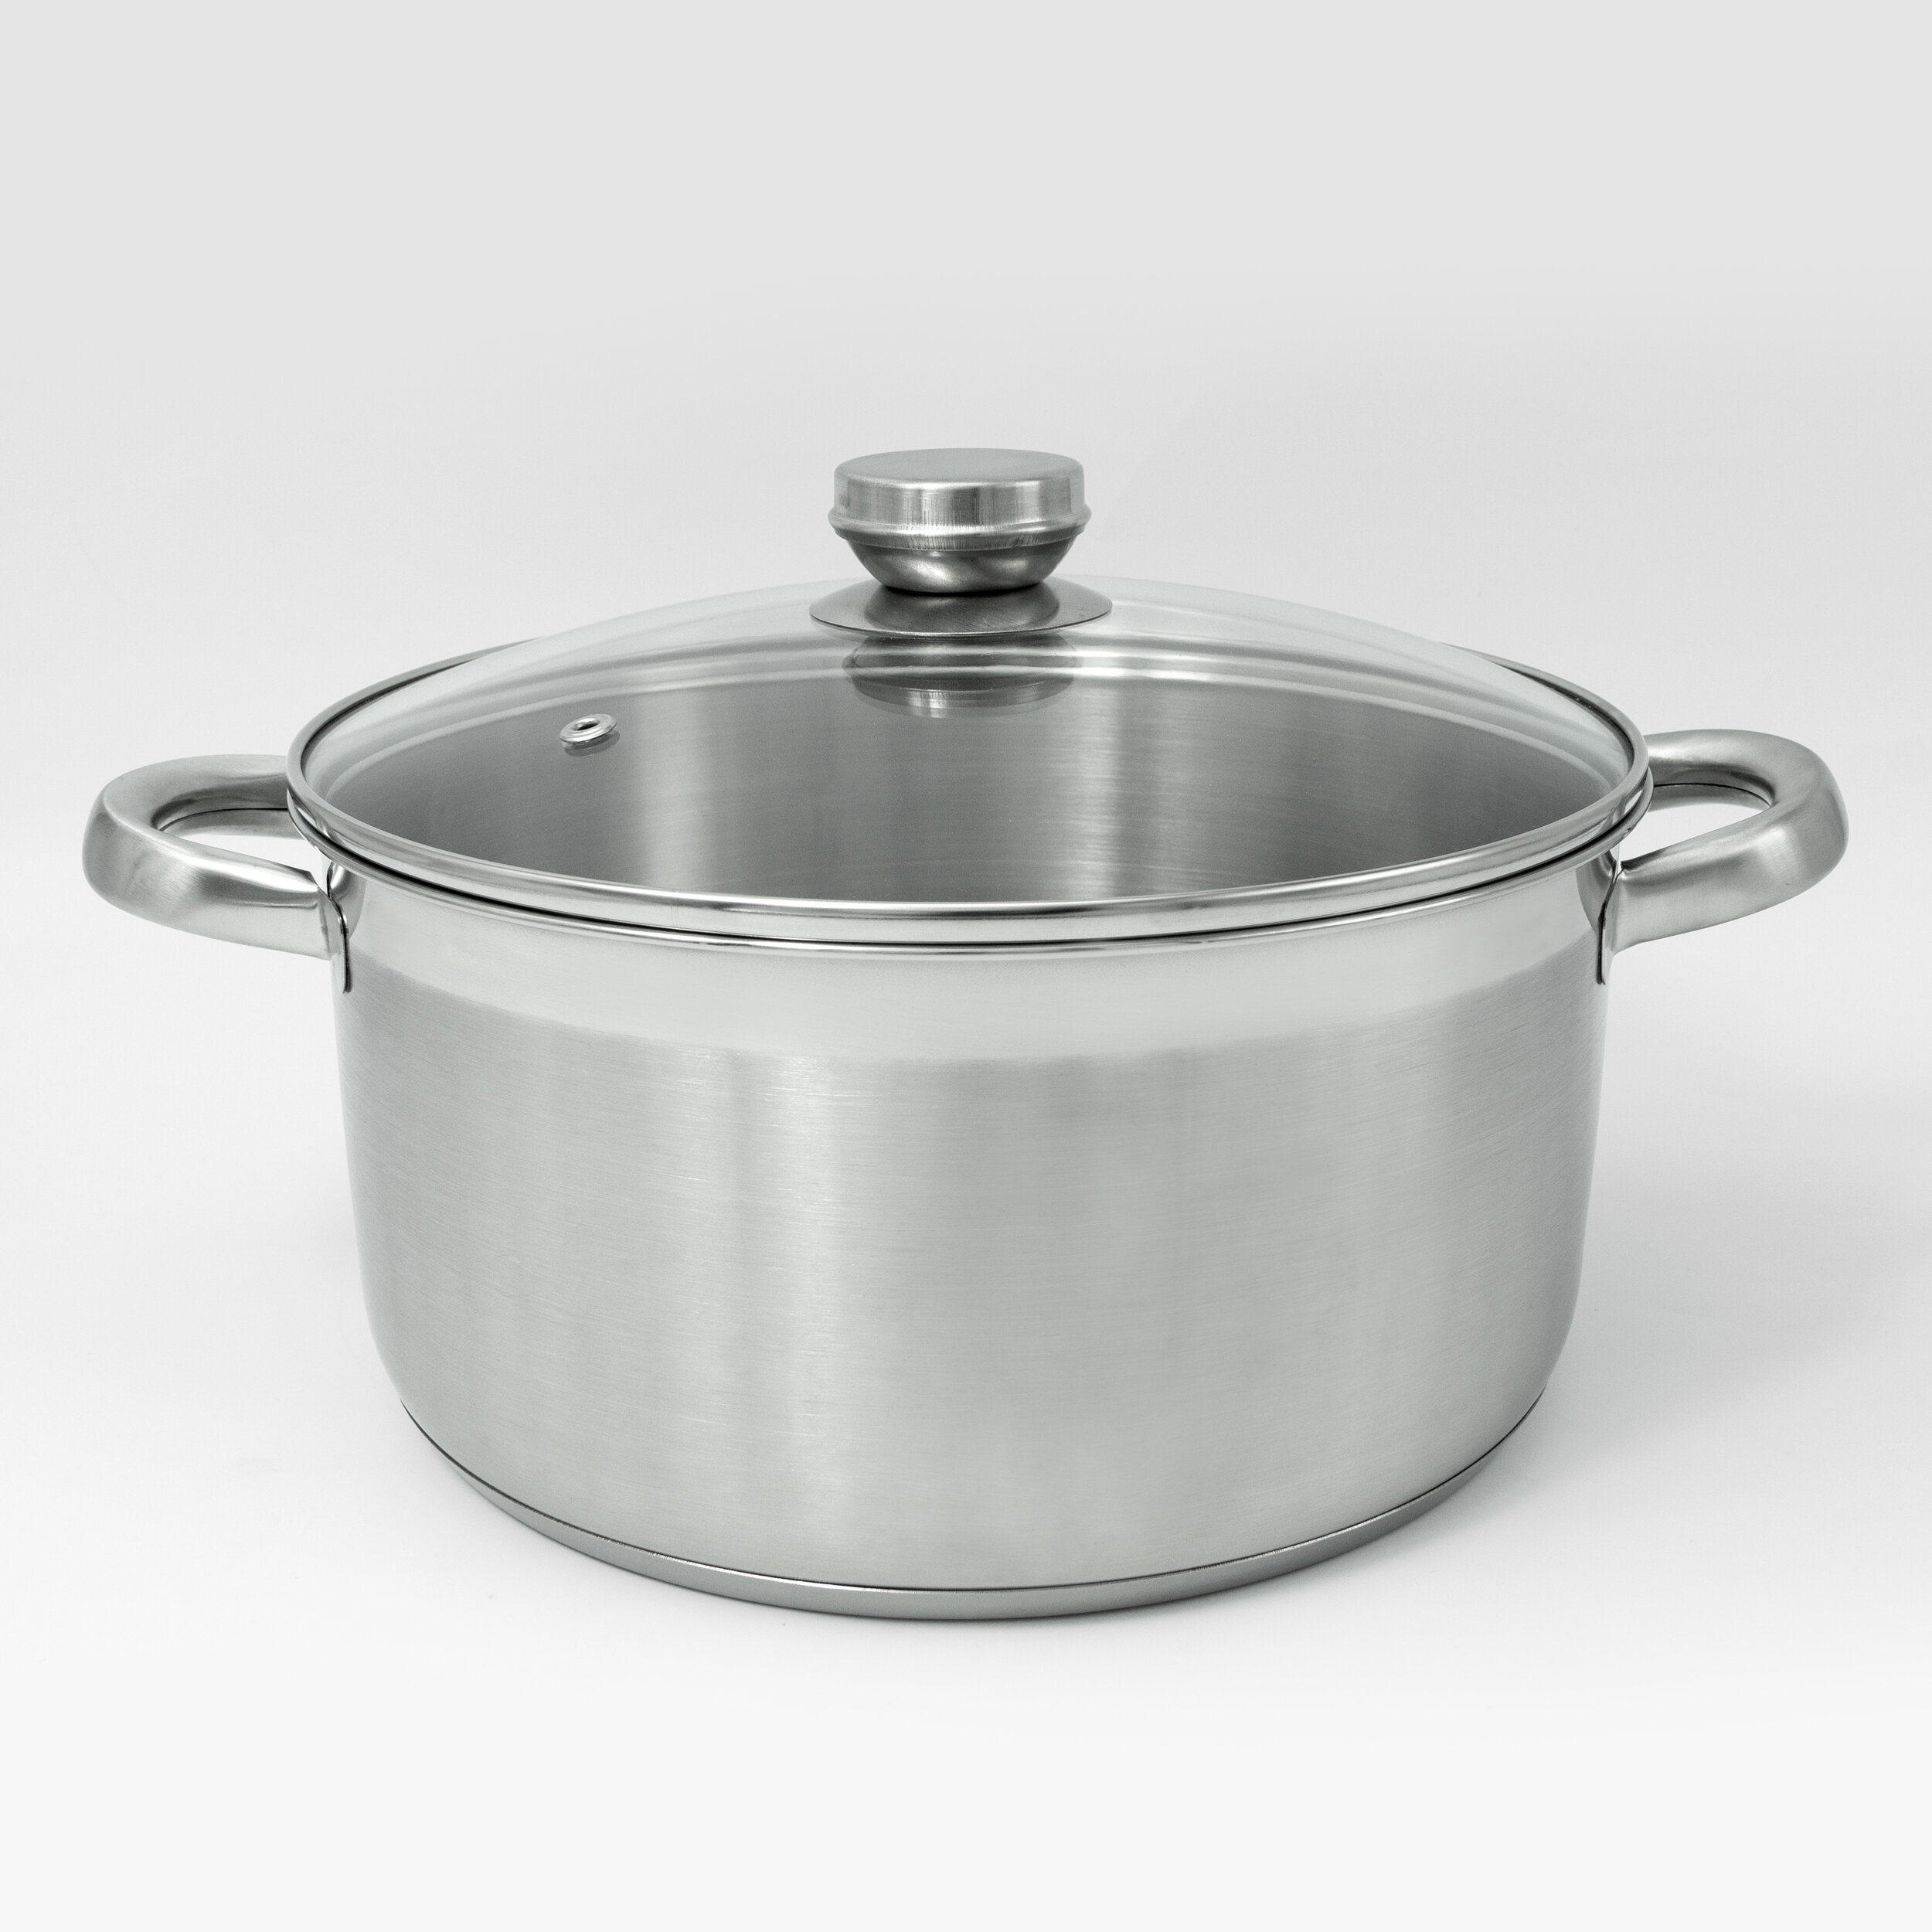 Bene Casa 5-Quart Capacity Dutch Oven, with glass lid, stainless